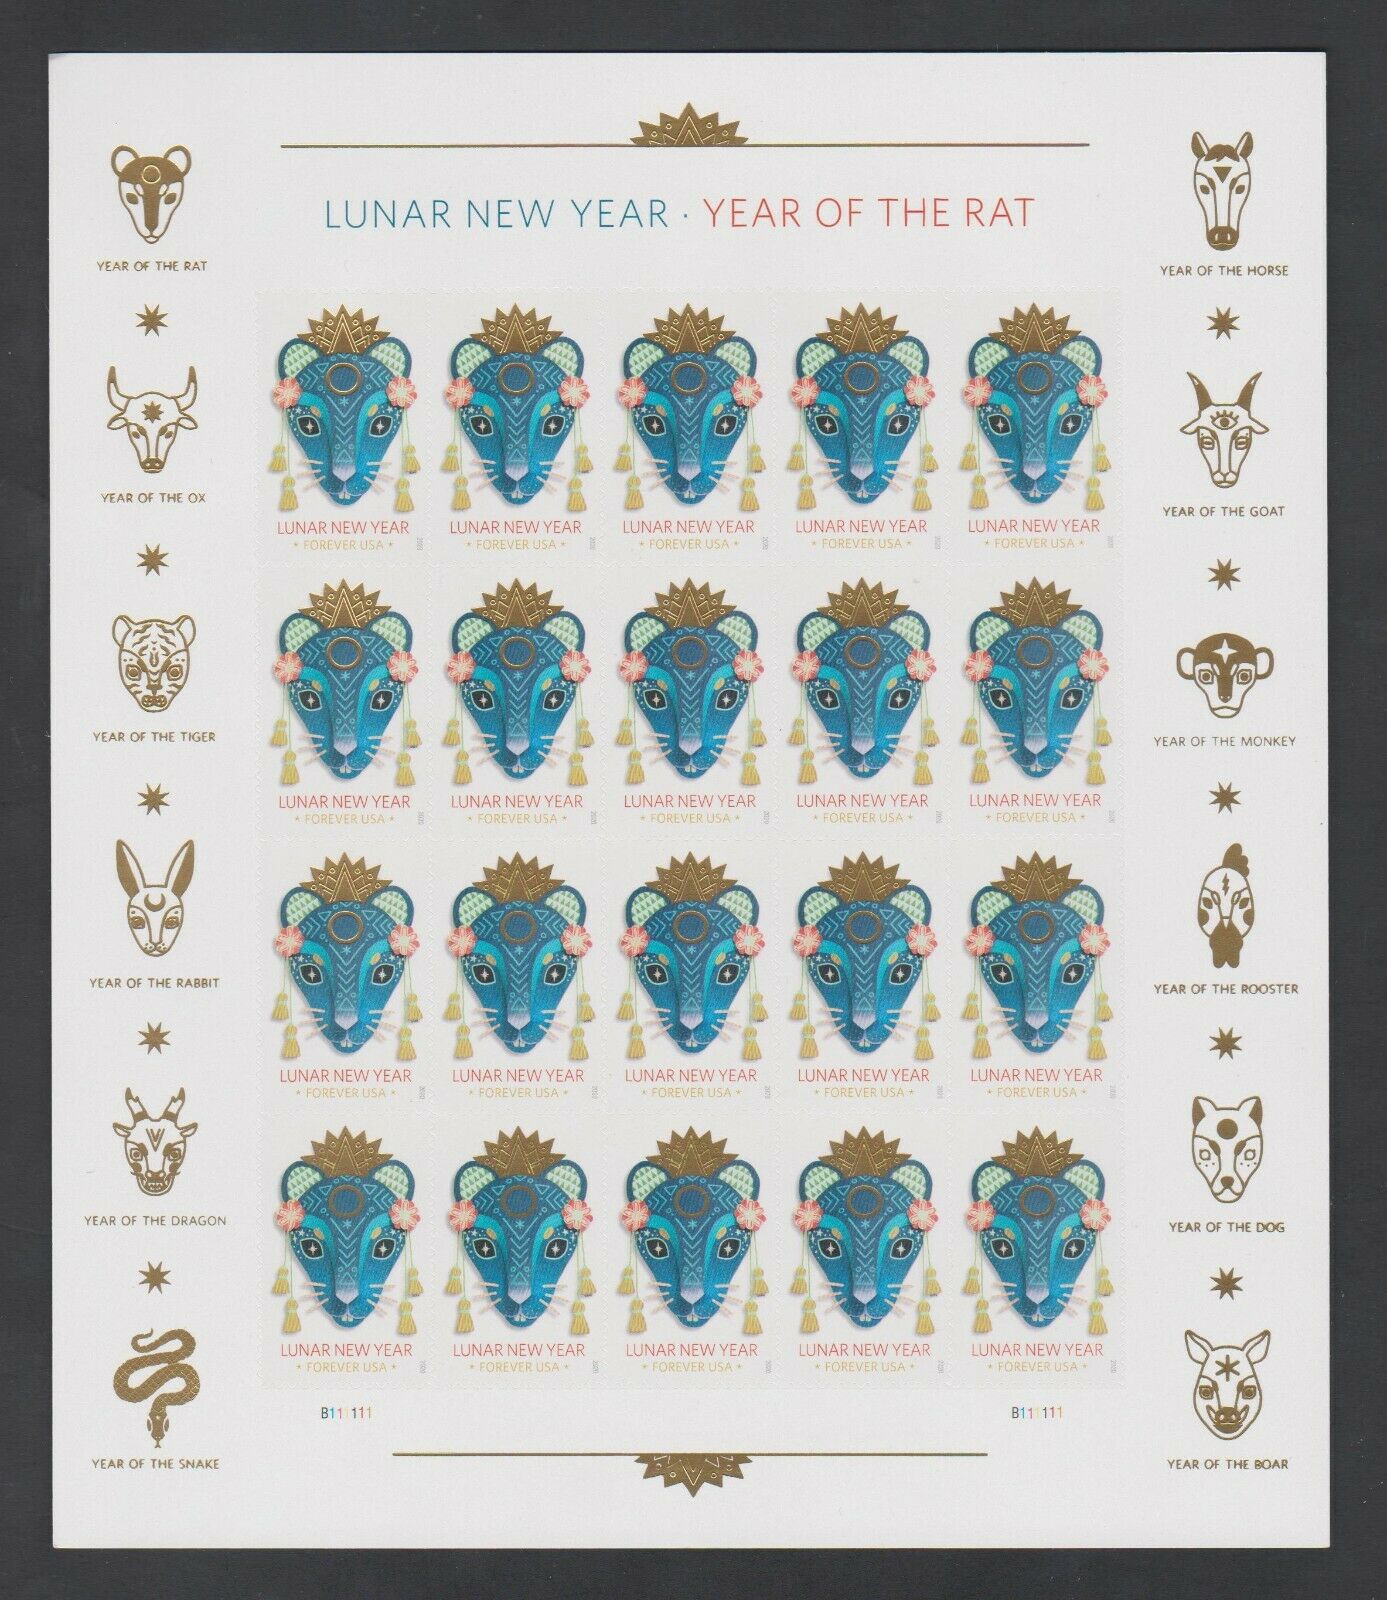 2020 Us Chinese Lunar New Year Of The Rat Forever Stamps Scott 5428 Panes Of 20